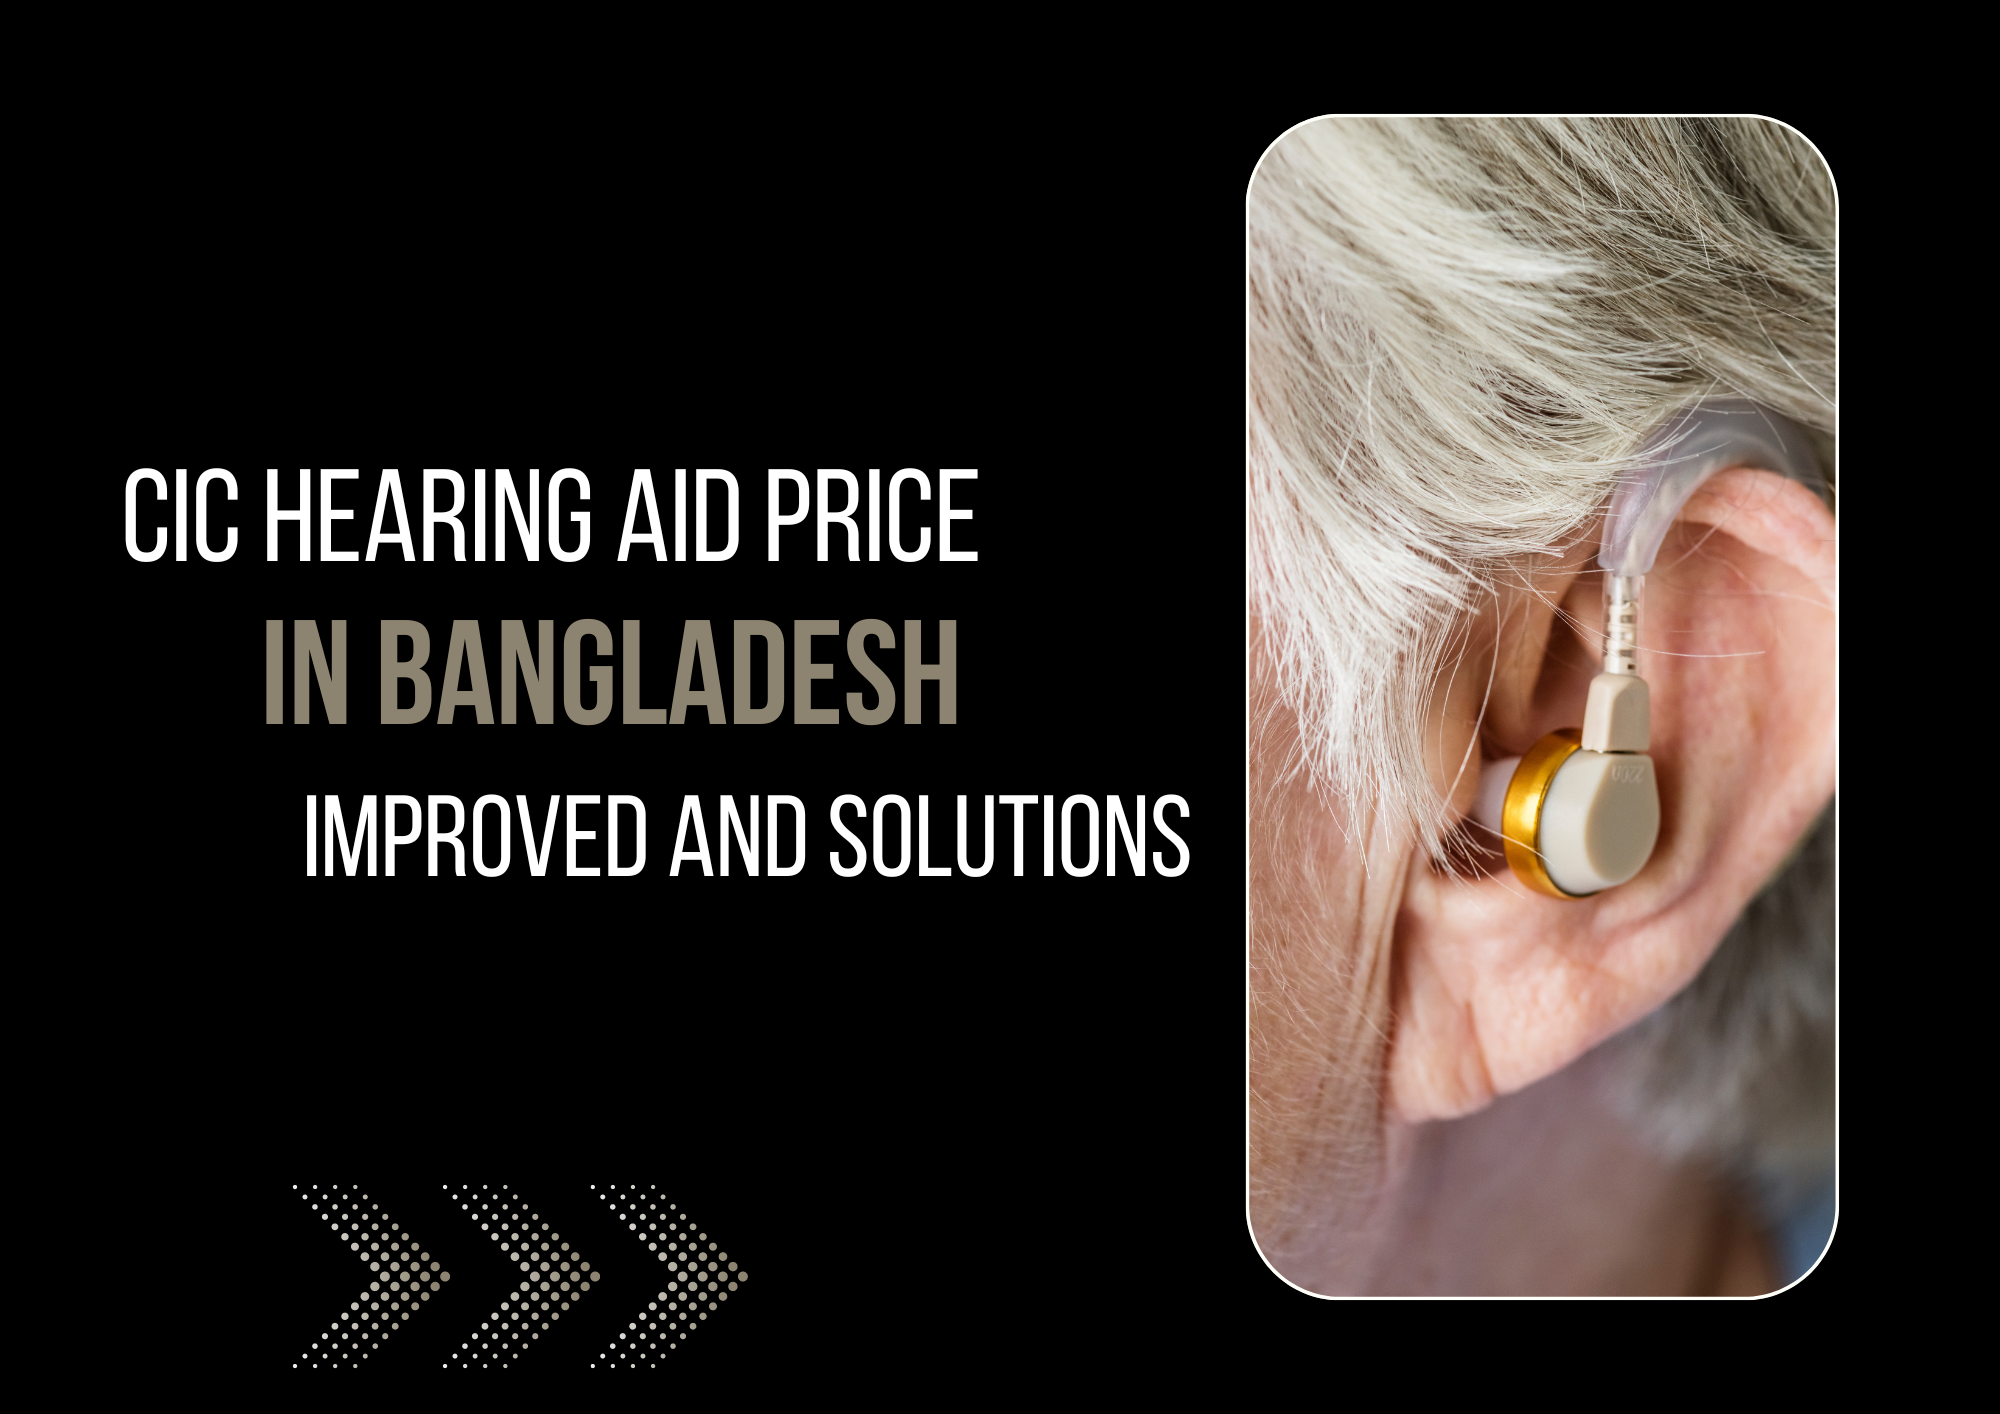 CIC Hearing Aid Price in Bangladesh Improved and Solutions